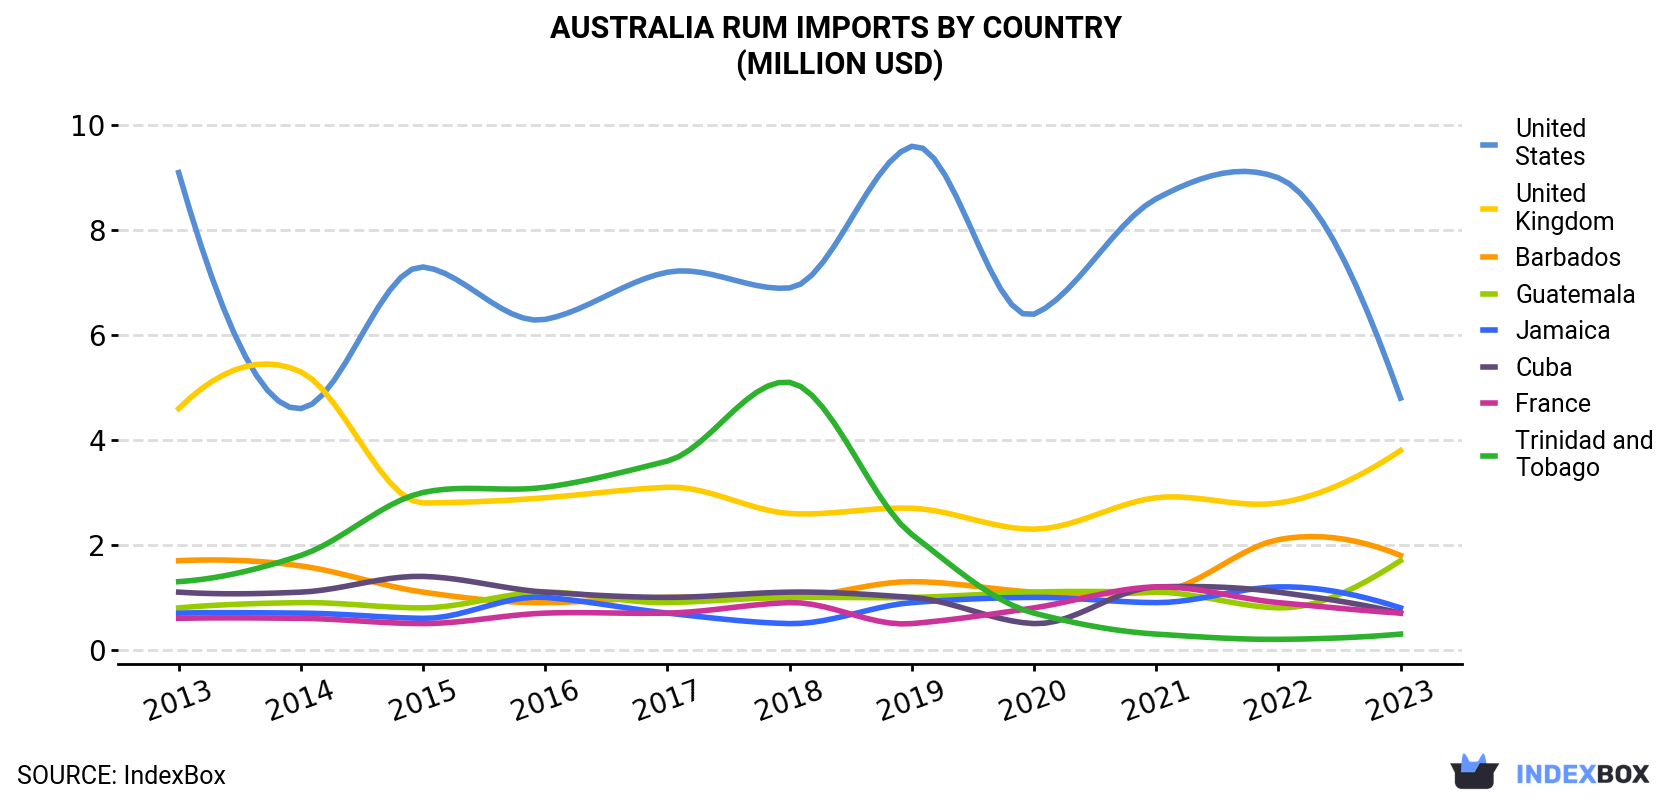 Australia Rum Imports By Country (Million USD)